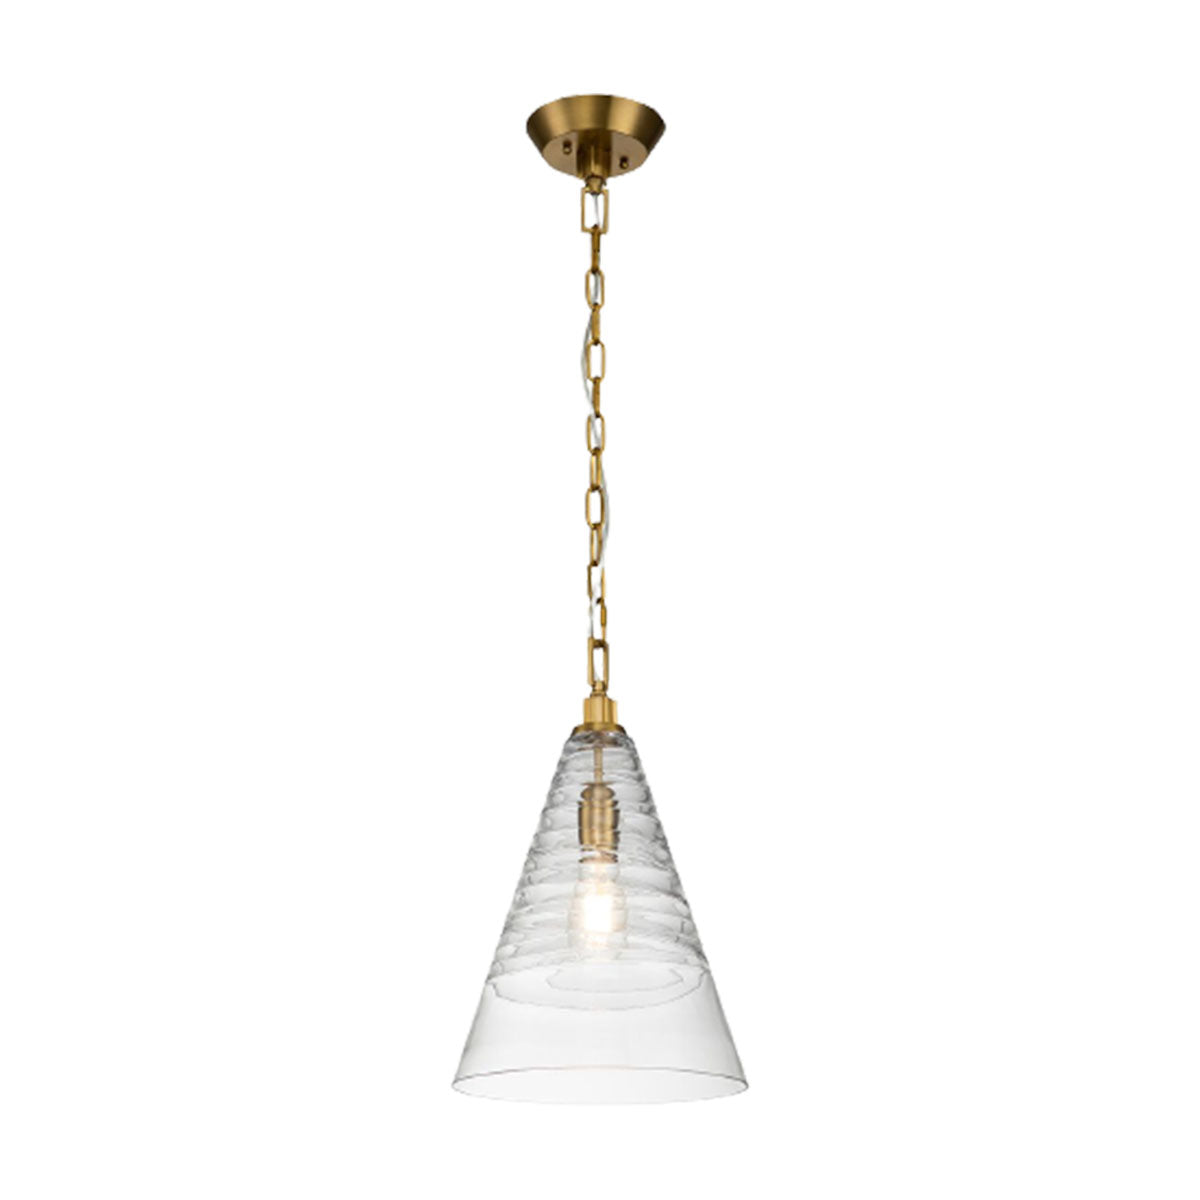 Single Ceiling Light In Burnished Brass Finish With Candy Glass